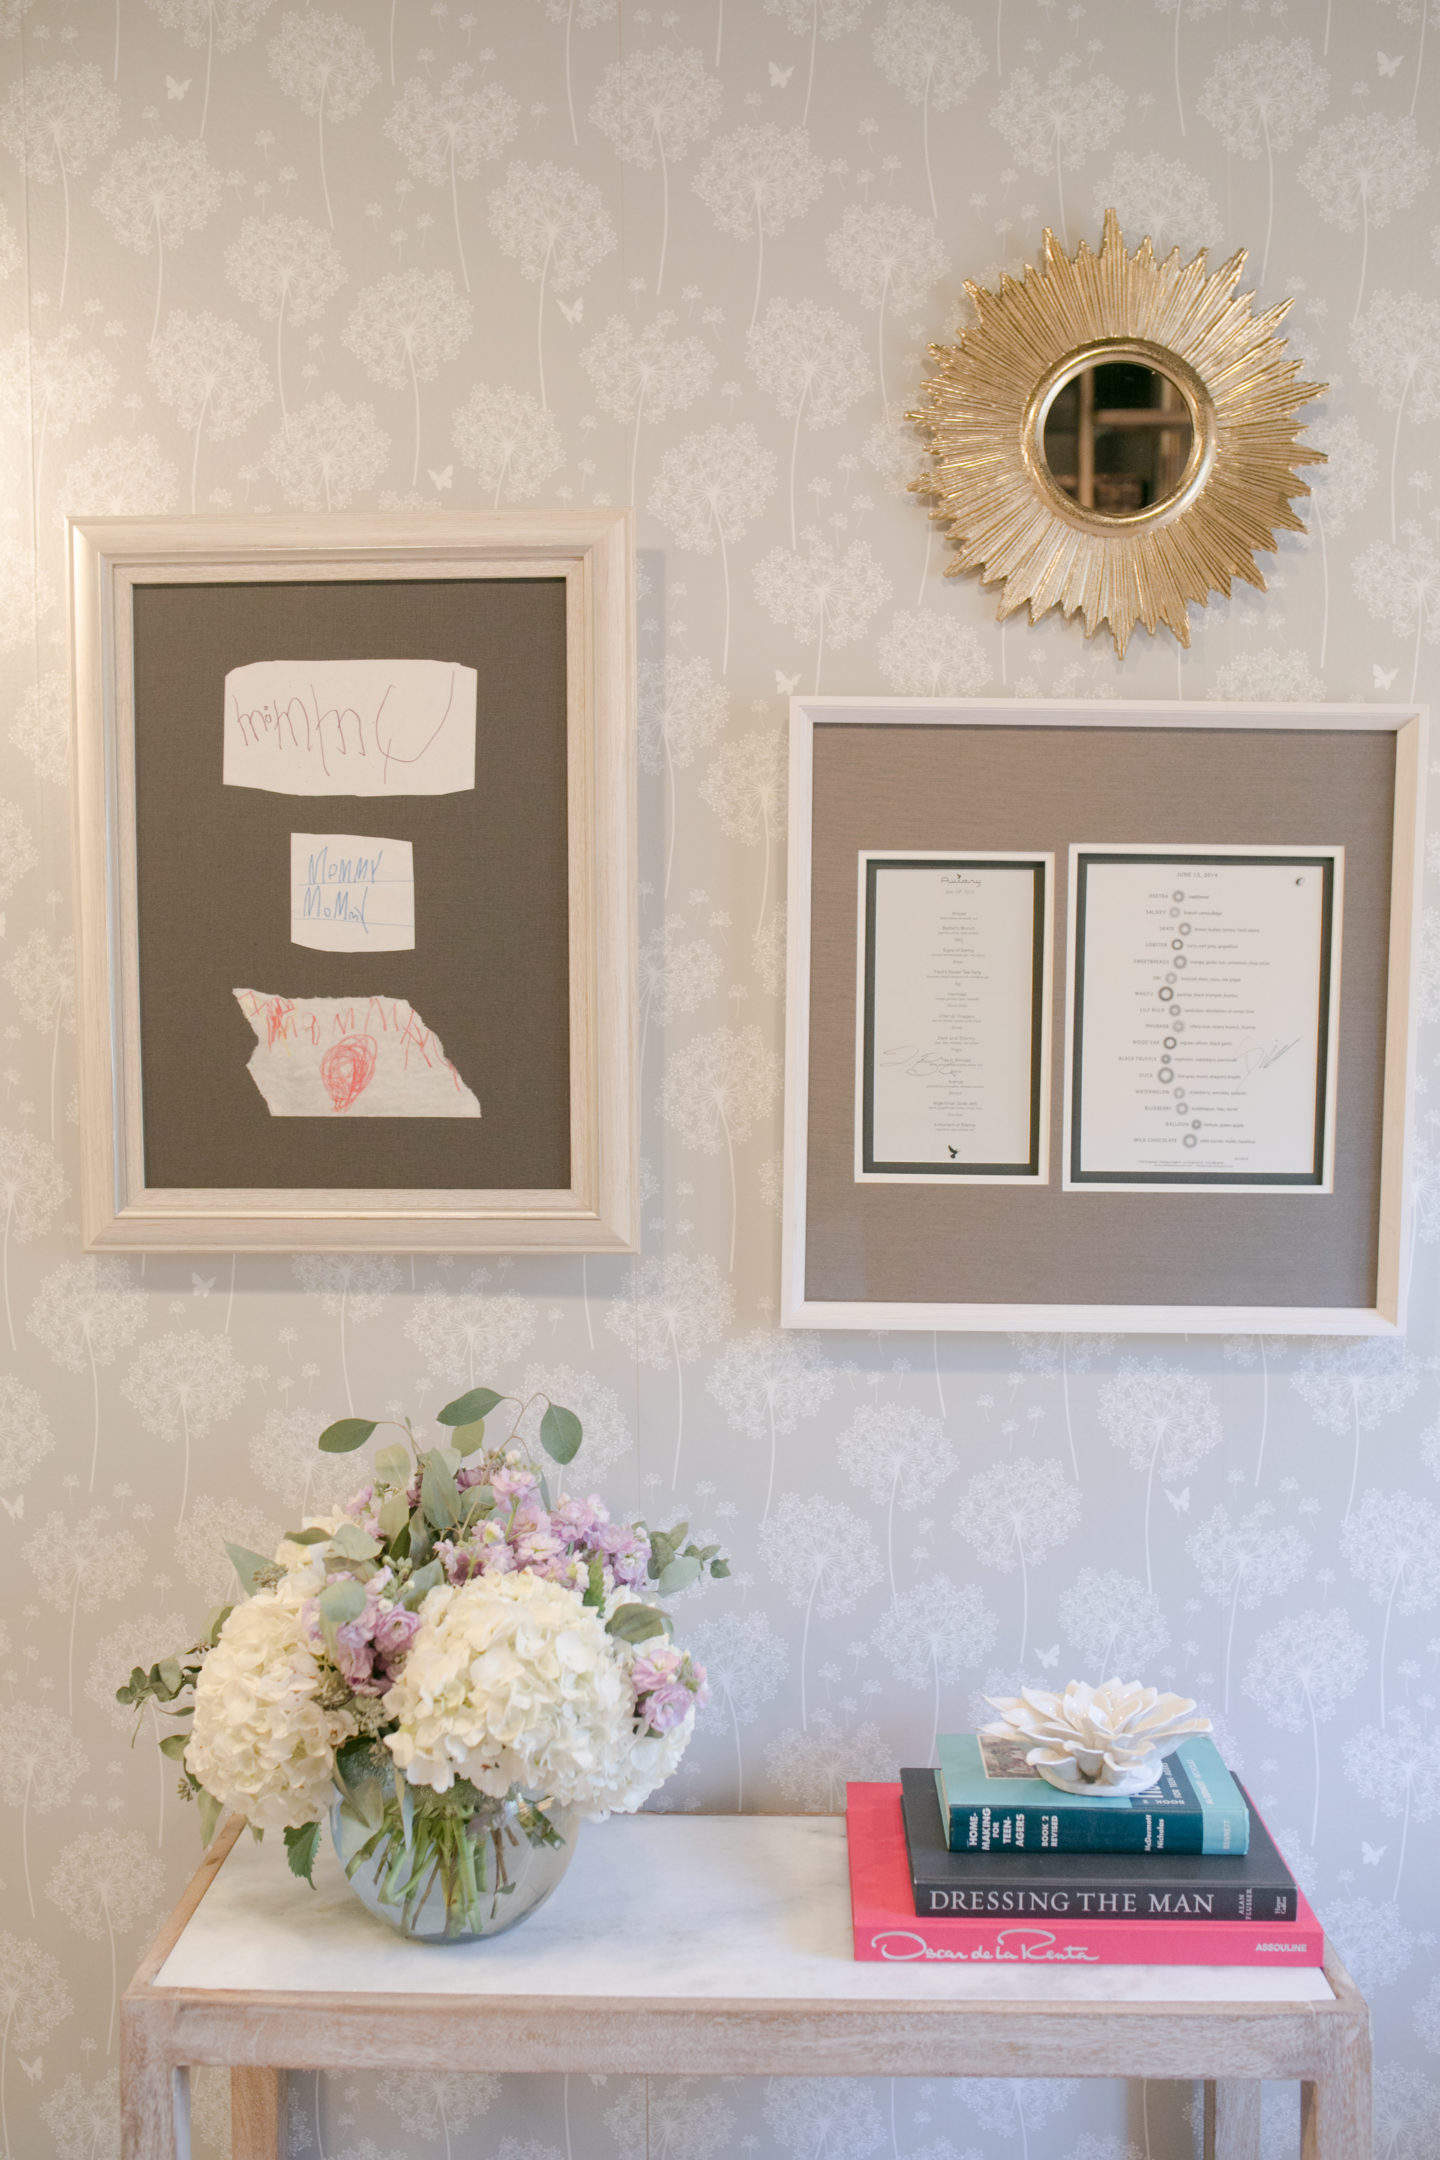 Dandelion wallpaper hung with personal art and a gold starburst mirror and hydrangea floral arrangement on a white console table. Removeable wallpaper with inspiration for unique things to frame in your house!